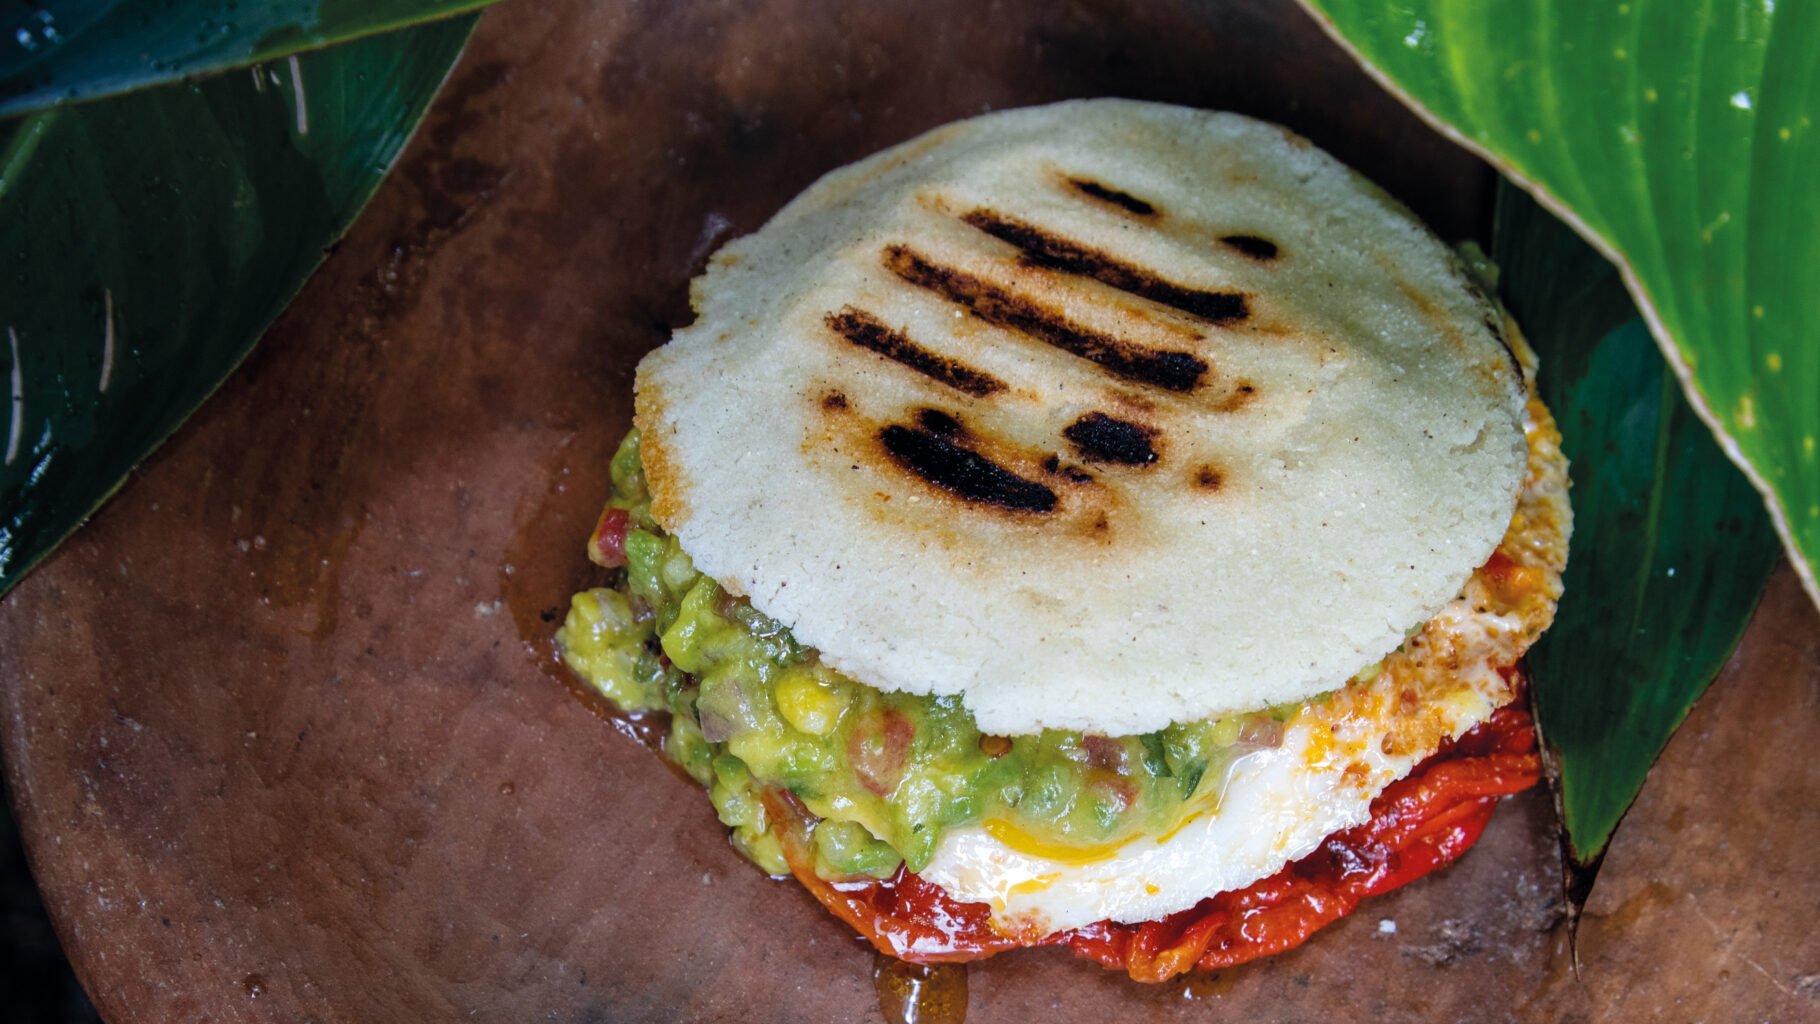 Huevos Rancheros Arepa excerpted from Arepa: Classic and Contemporary recipes for Venezuela’s Daily Bread by Irena Stein.